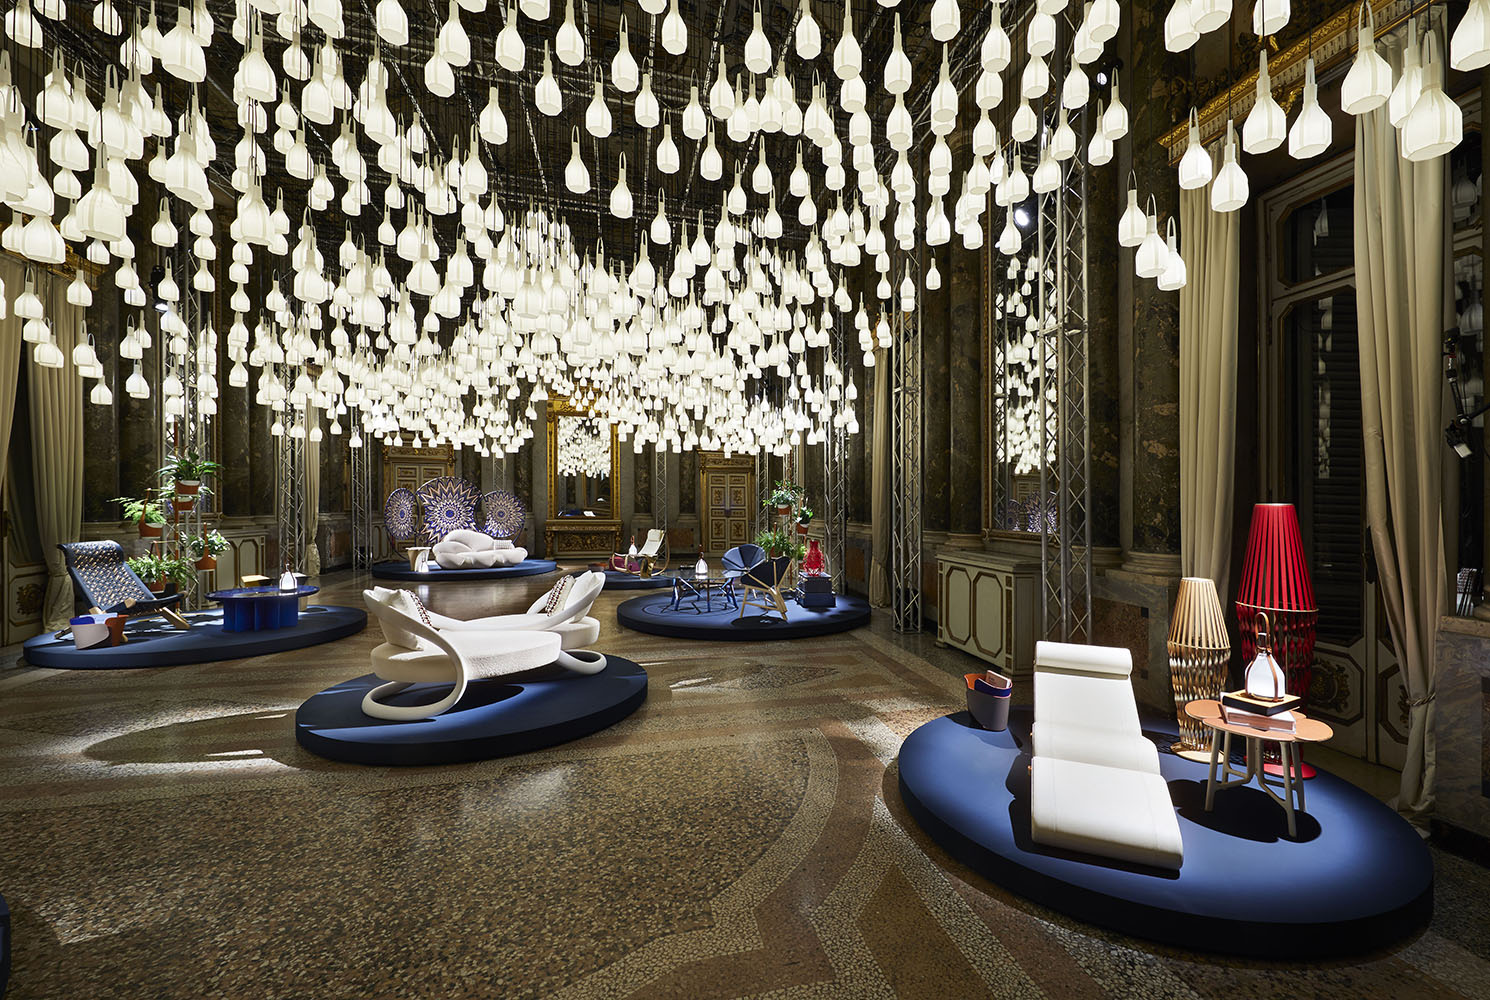 Objets Nomades by Louis Vuitton at Palazzo Serbelloni in Milan